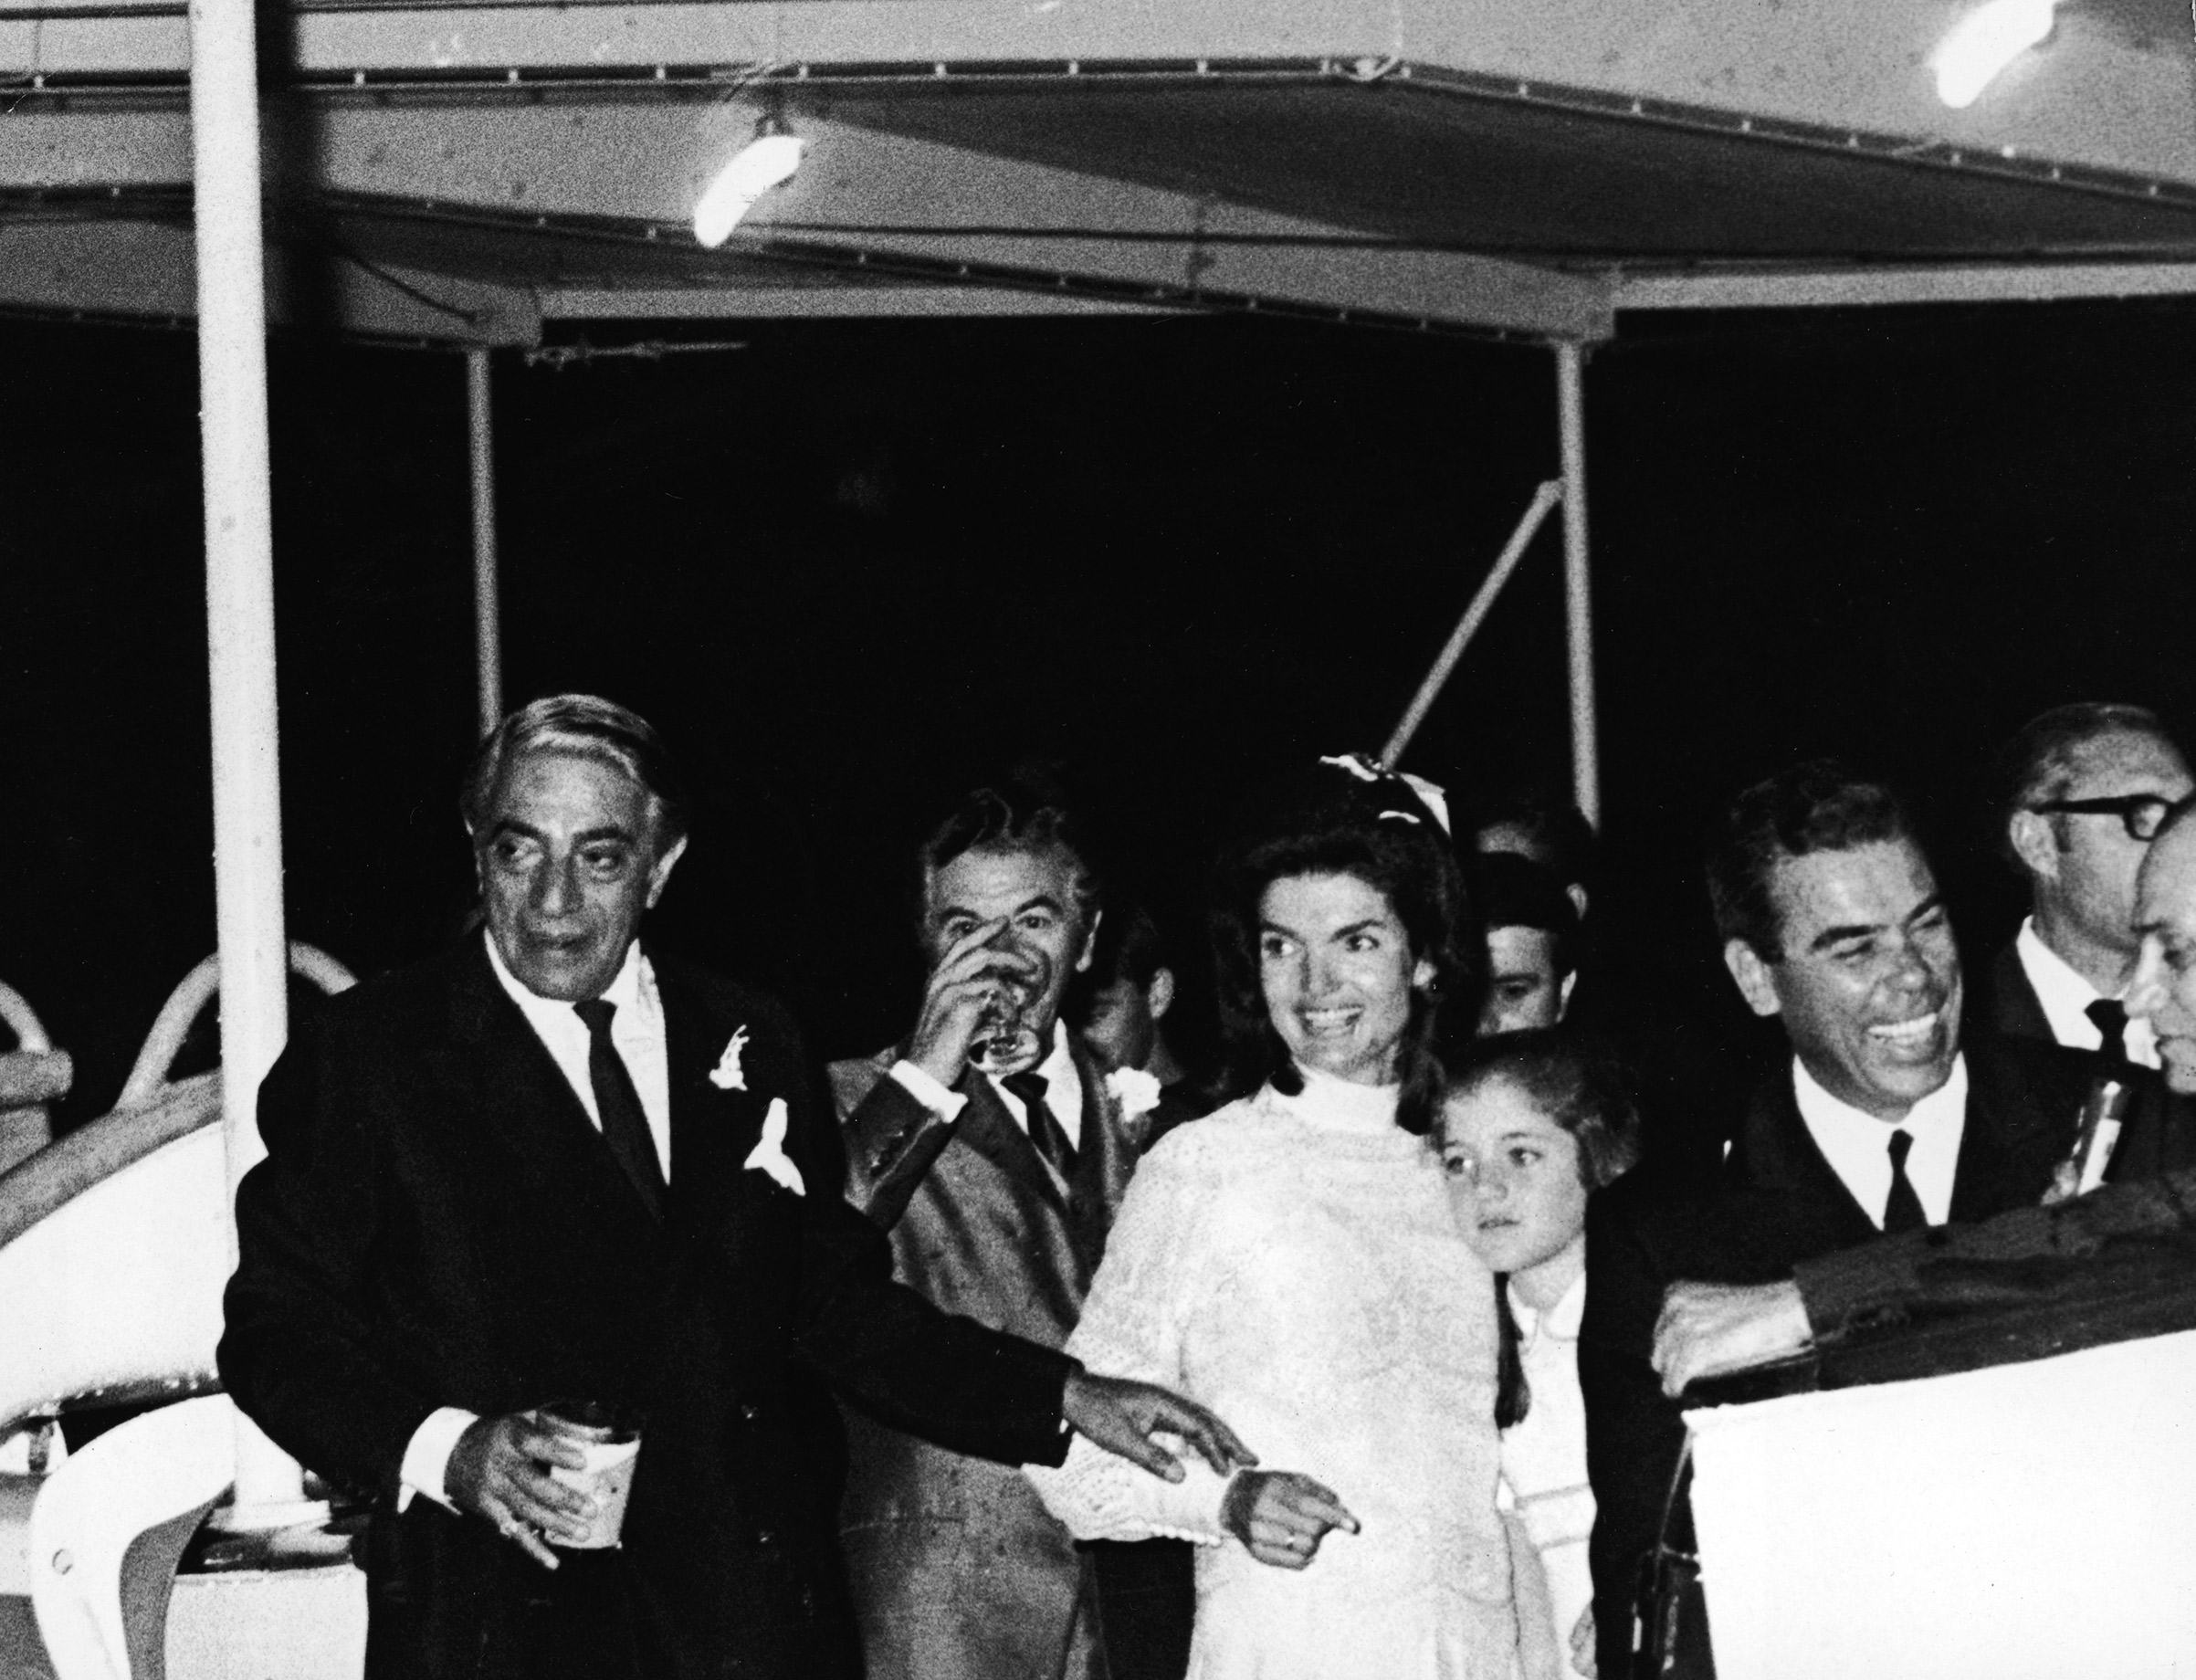 Jacqueline Kennedy Onassis, embracing her daughter, Caroline Kennedy, and her new husband, Greek shipping magnate Aristotle Onassis at their wedding reception aboard the yacht, <i>Christina</i>, shortly after they tied the knot on the Island of Skorpios, Greece, on Oct. 21, 1968. (Express Newspapers—Getty Images)